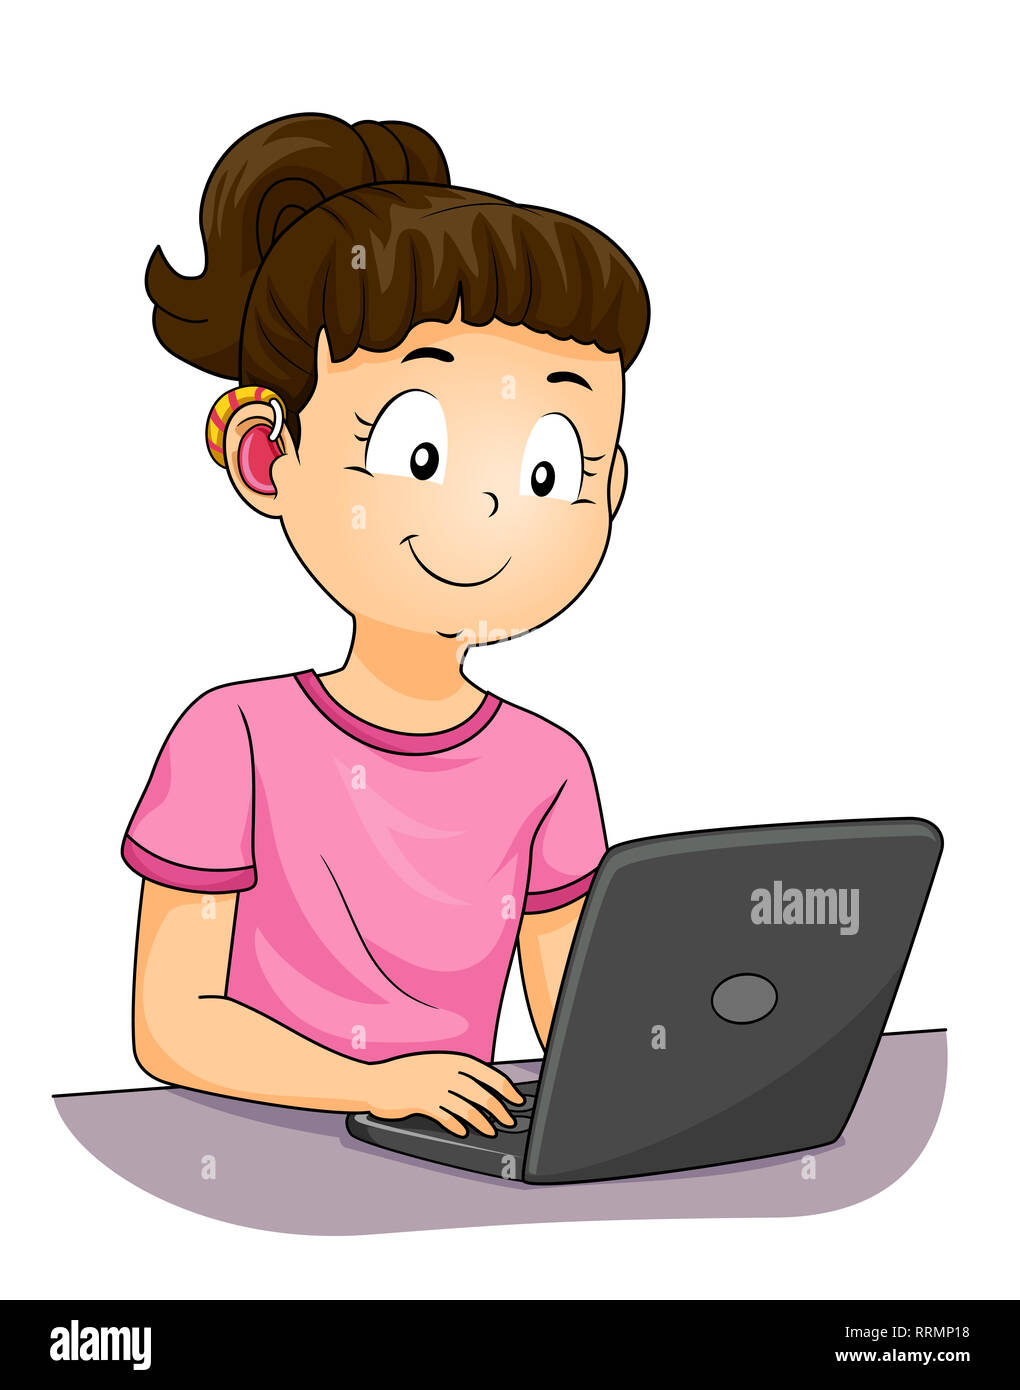 Illustration of a Deaf Kid Girl Wearing a Hearing Aid and Using a Laptop Stock Photo